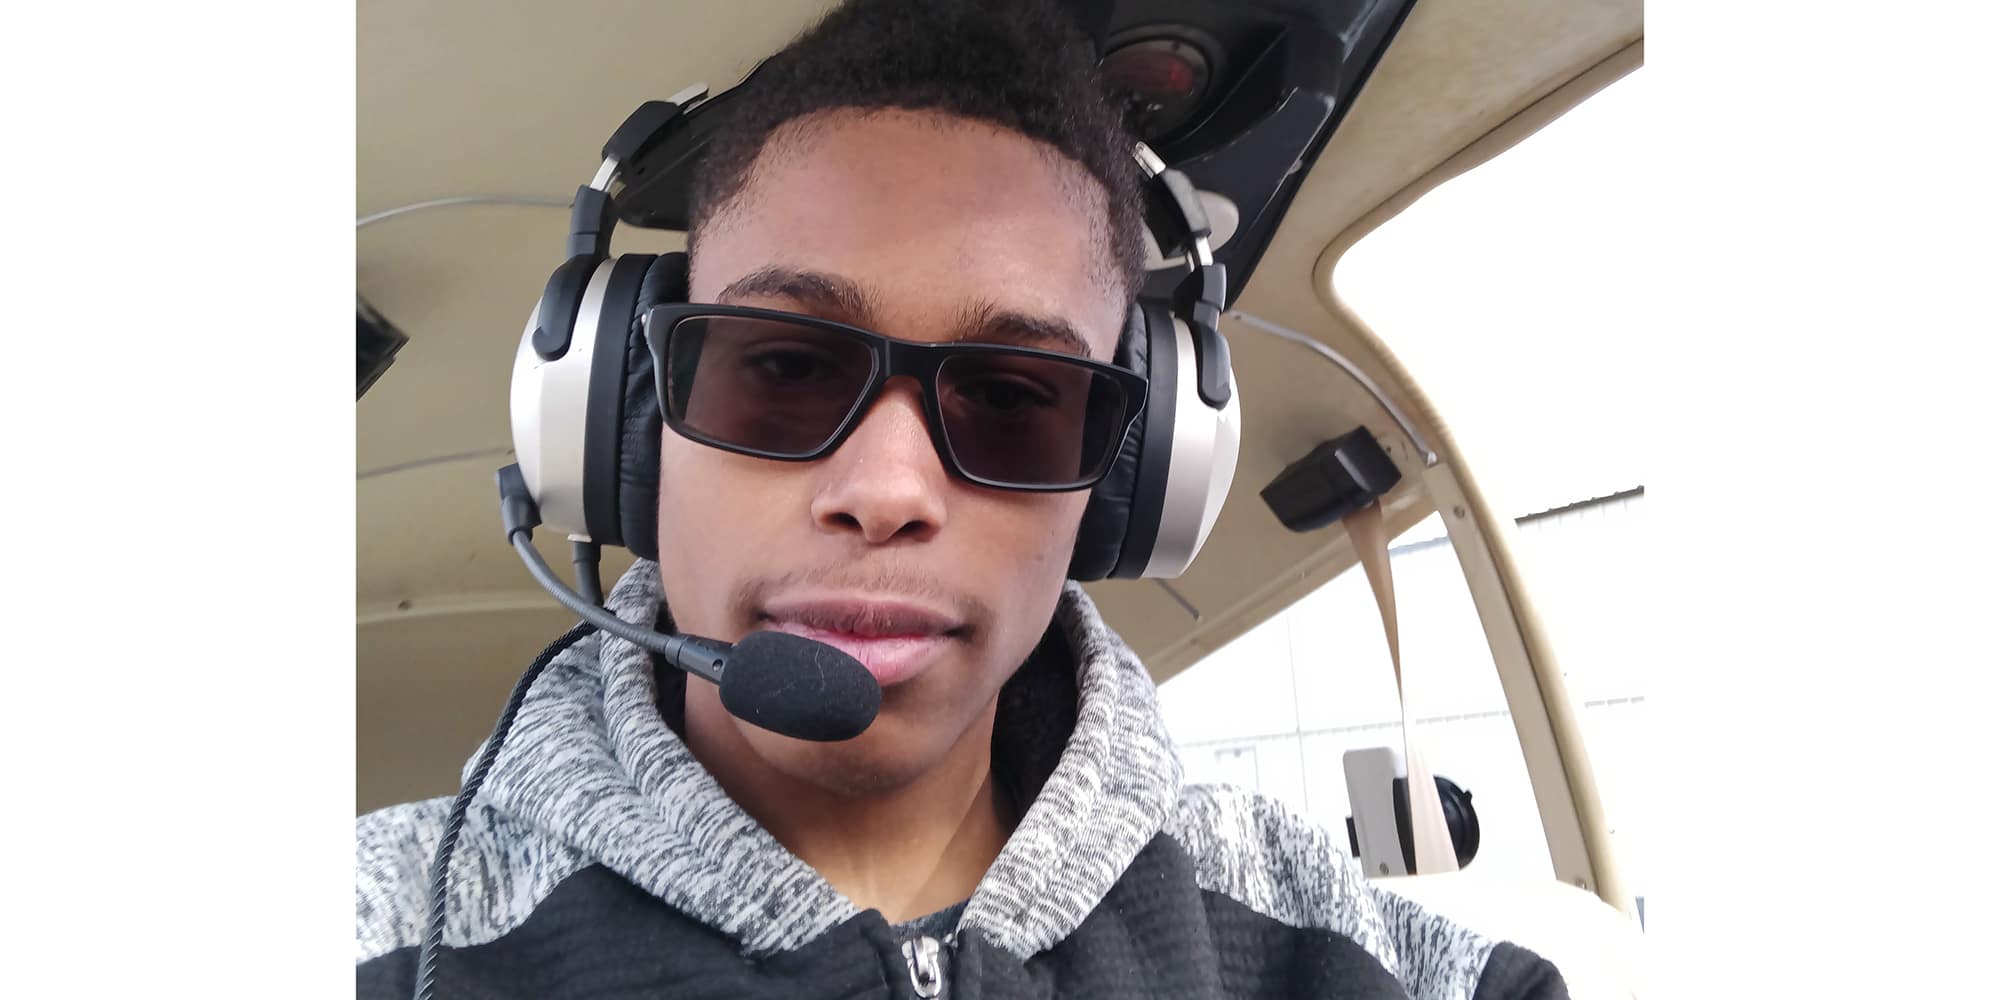 With headset in place, Josiah Moise is ready to add some more flight time to the growing total in his pilot logbook. (Photo: Josiah Moise)